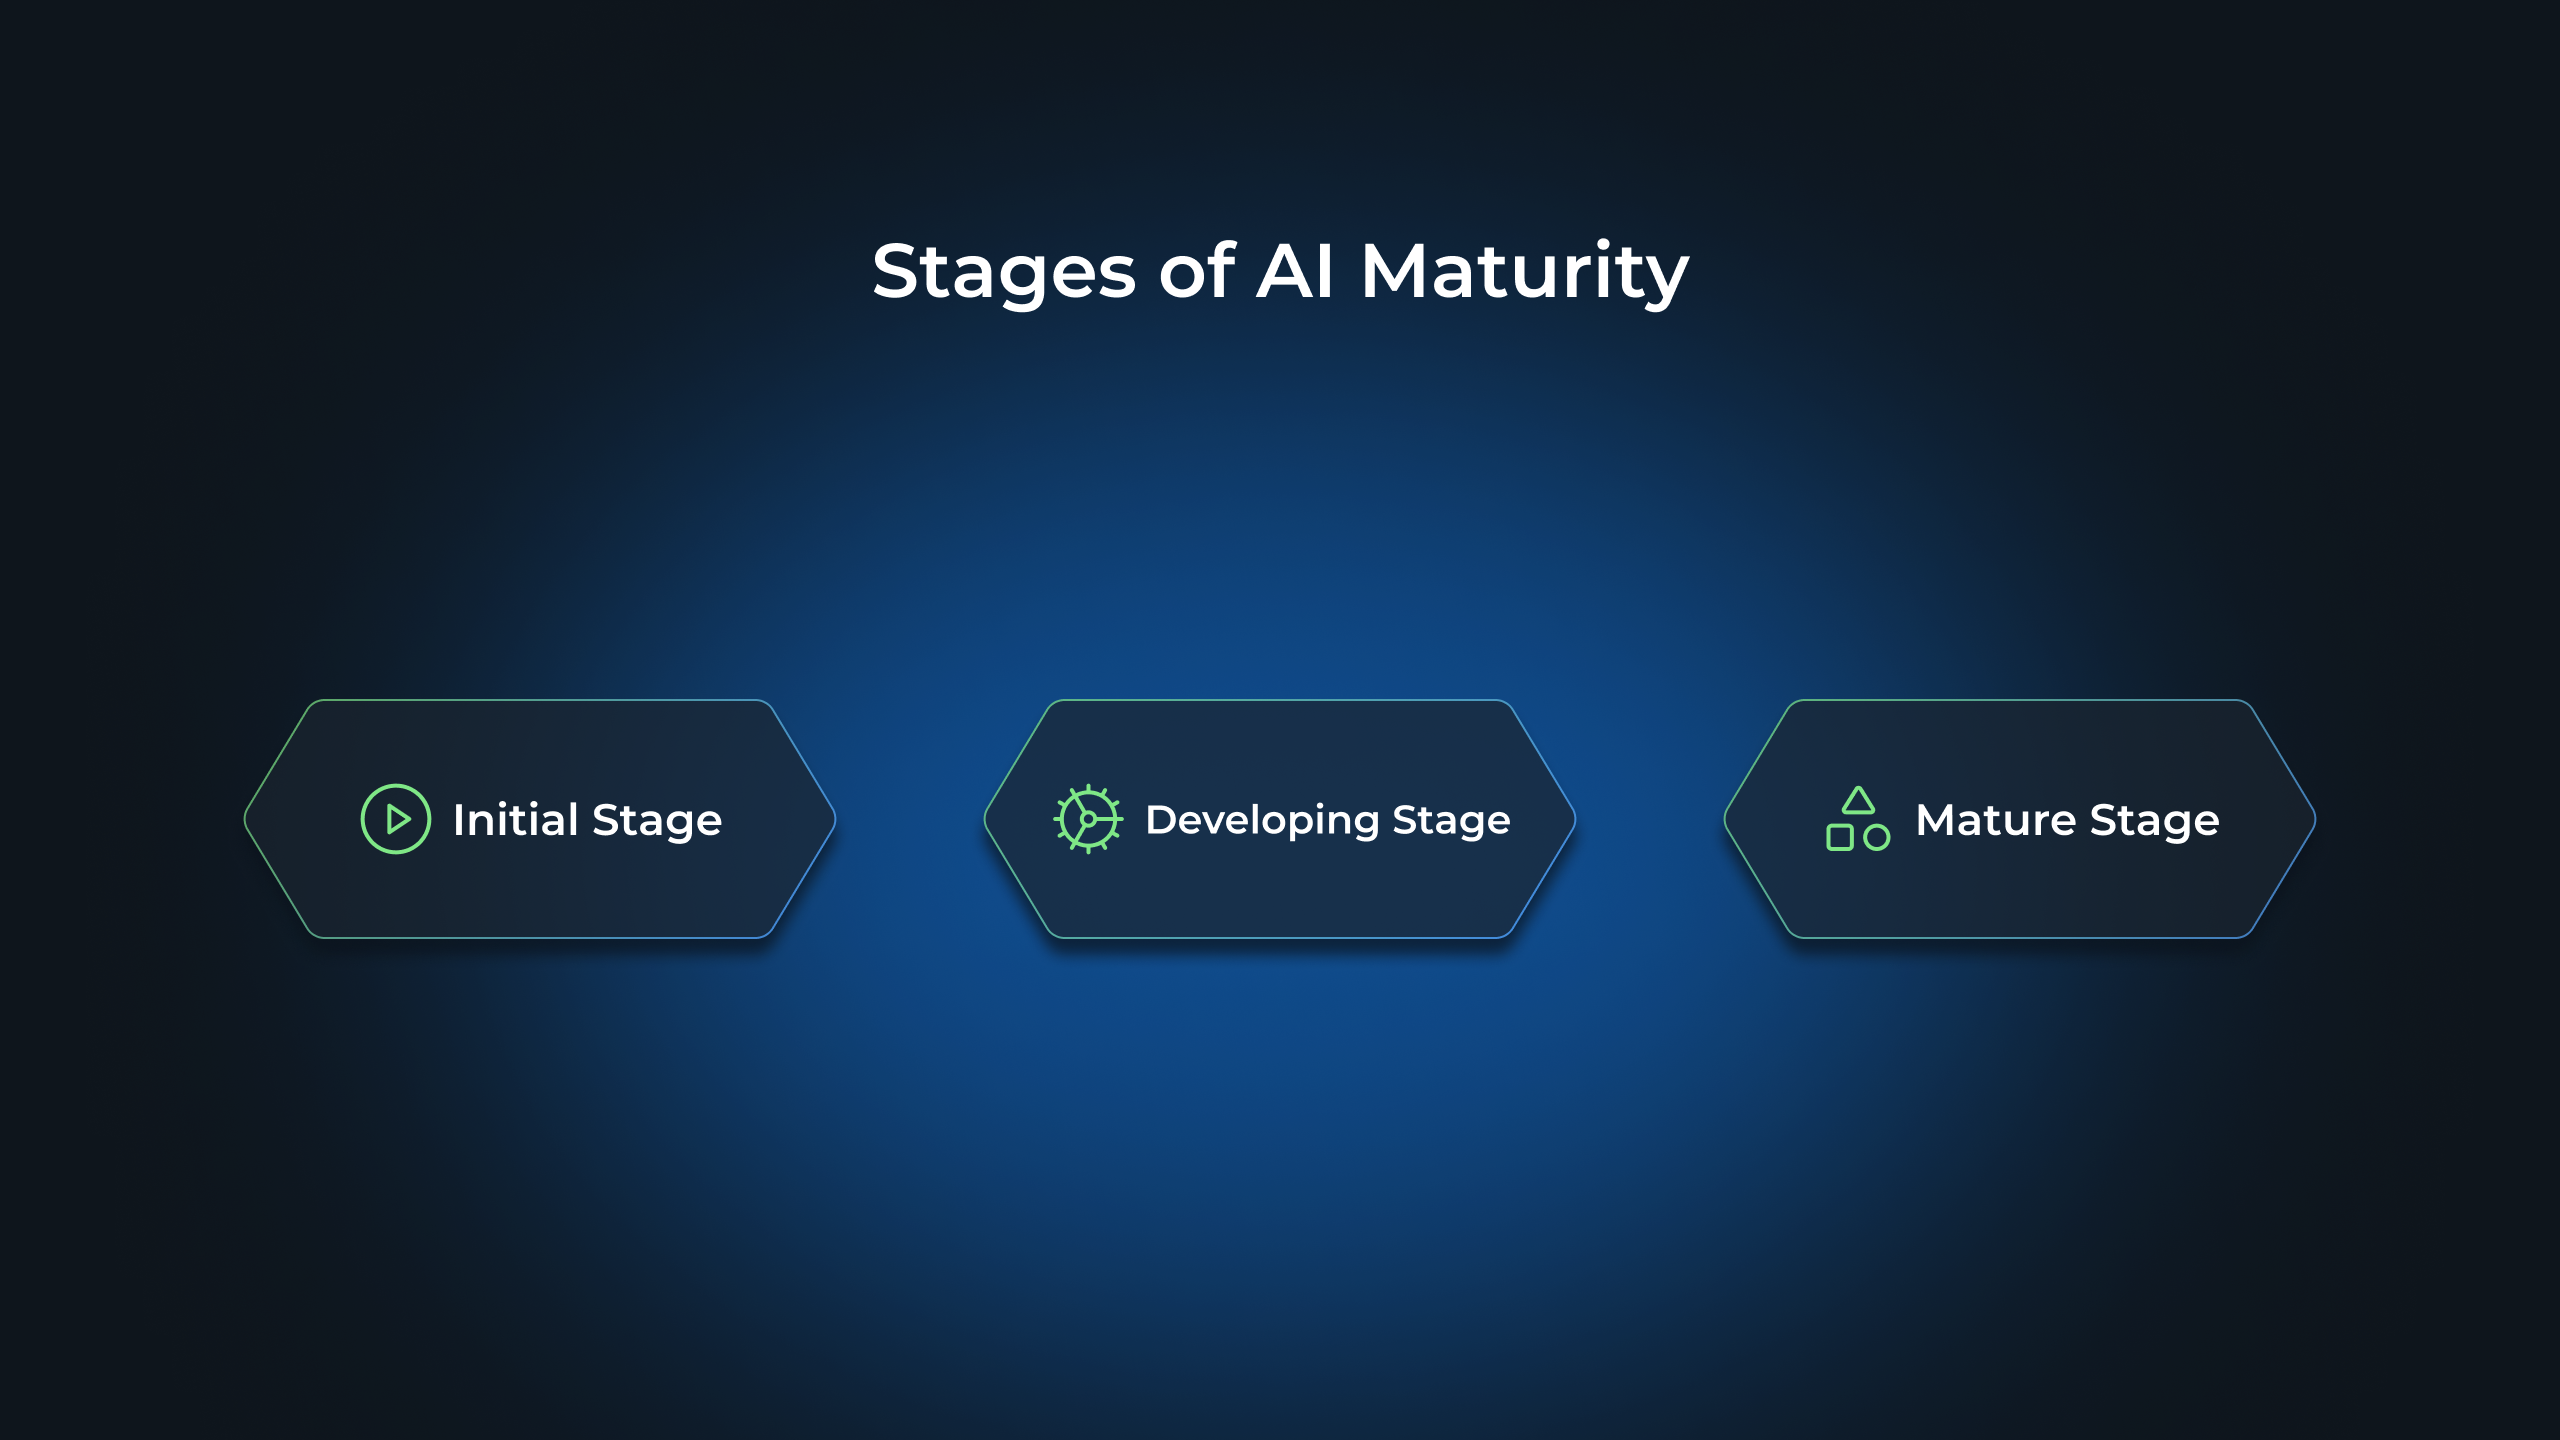 Stages of AI Maturity
Initial Stage
Developing Stage
Mature Stage

